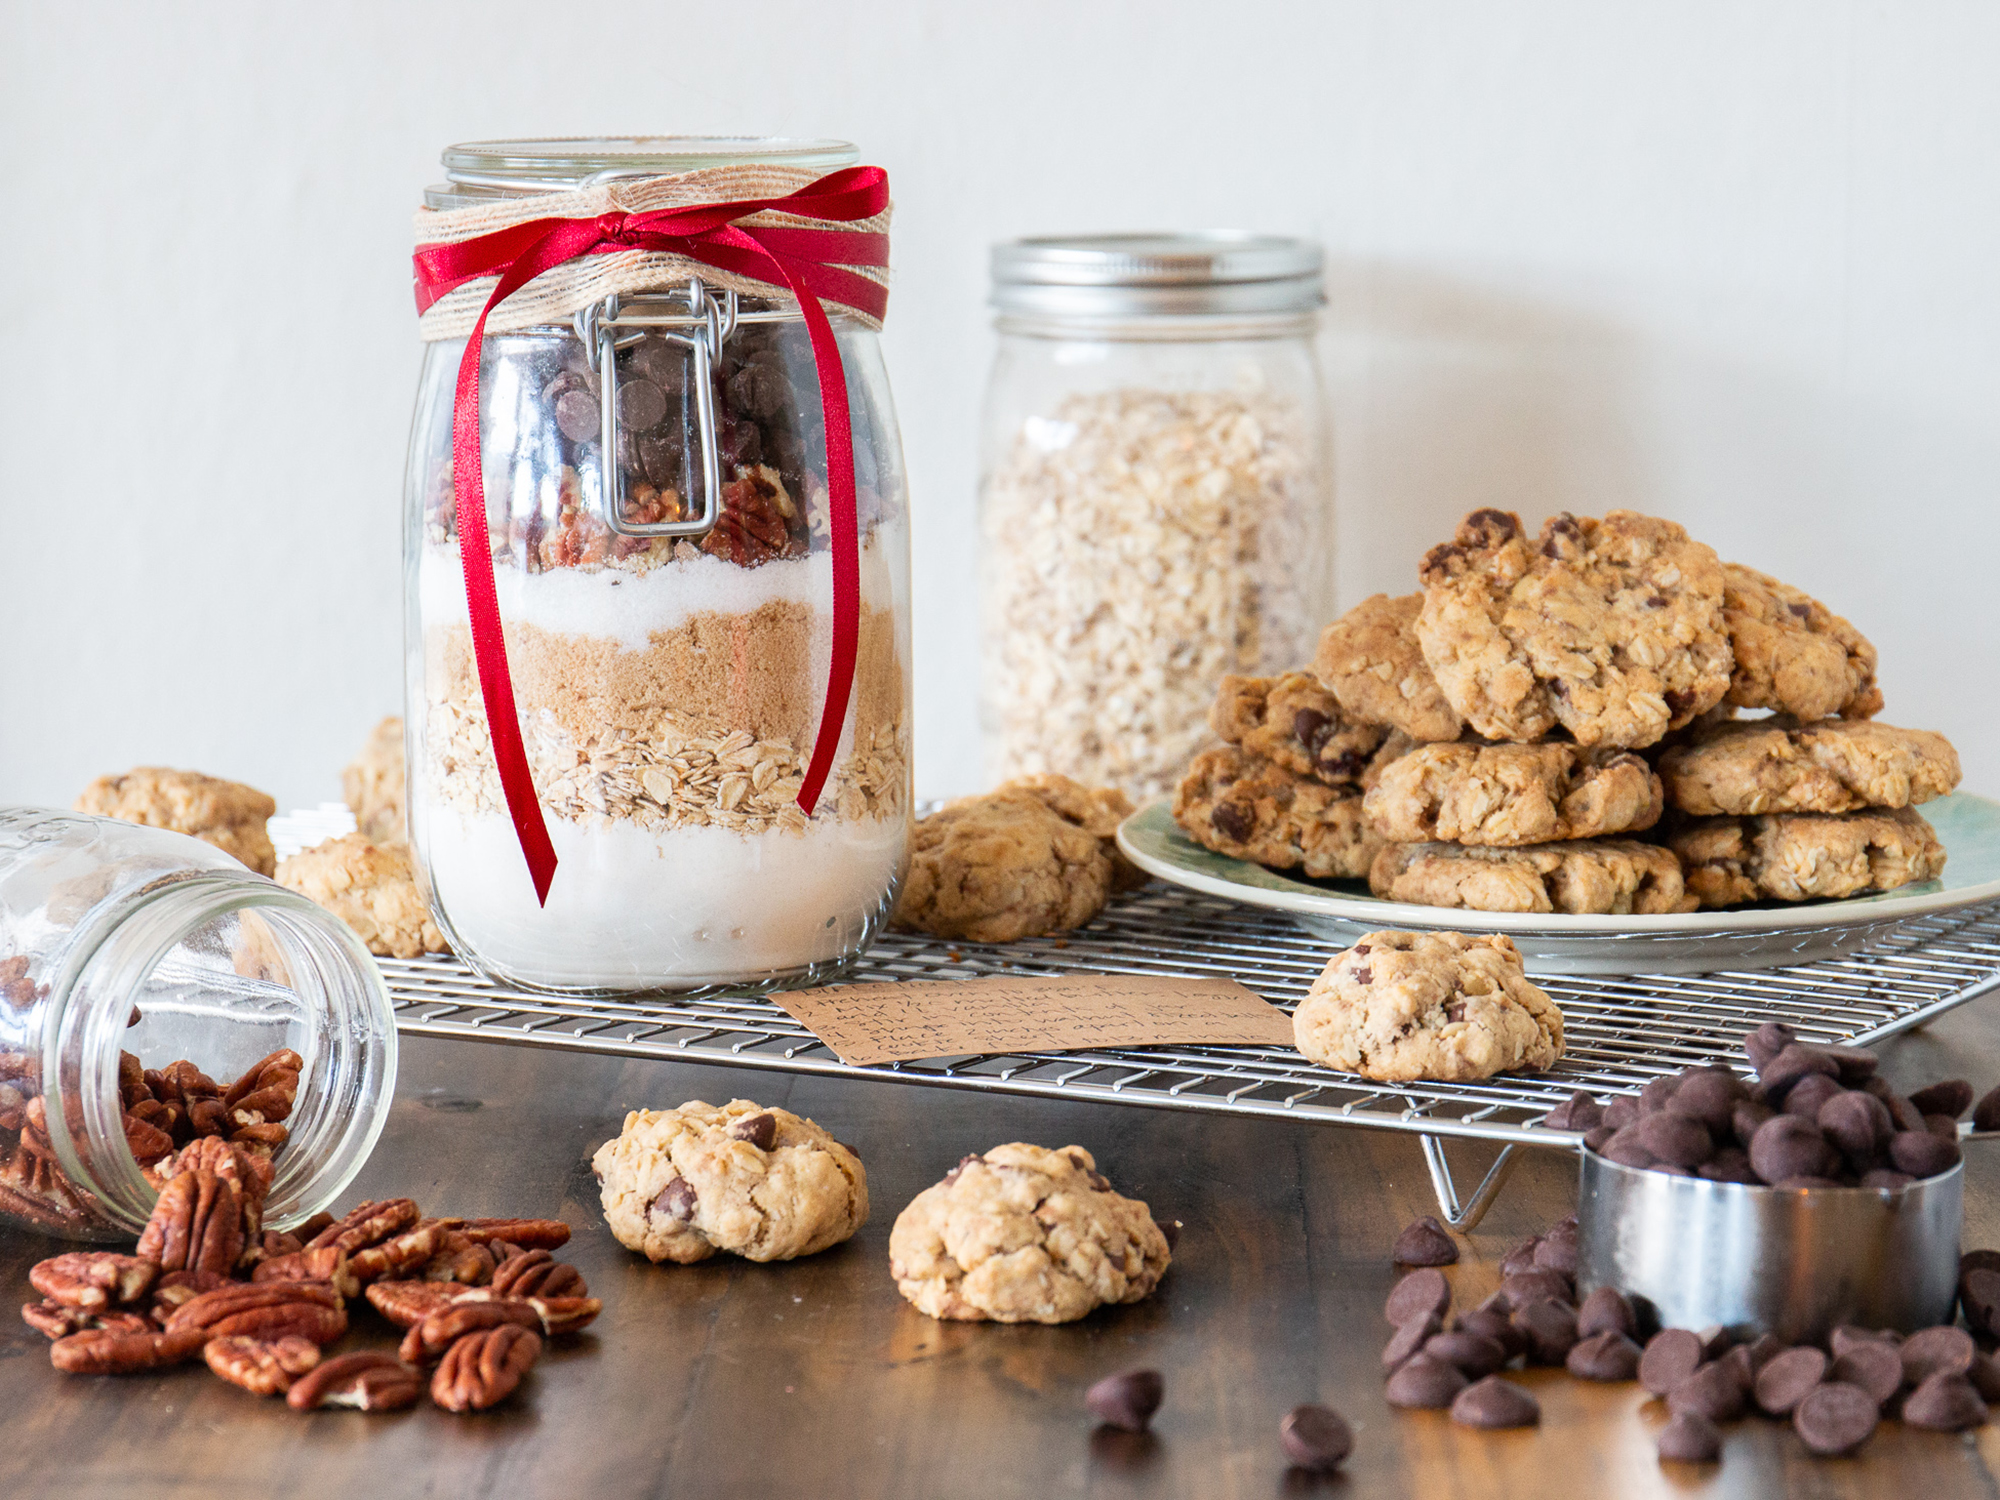 close up view of Cowboy Cookie Mix in a Jar with a red bow, next to cookies on a plate, nuts in a jar and chocolate chips in a measuring cup